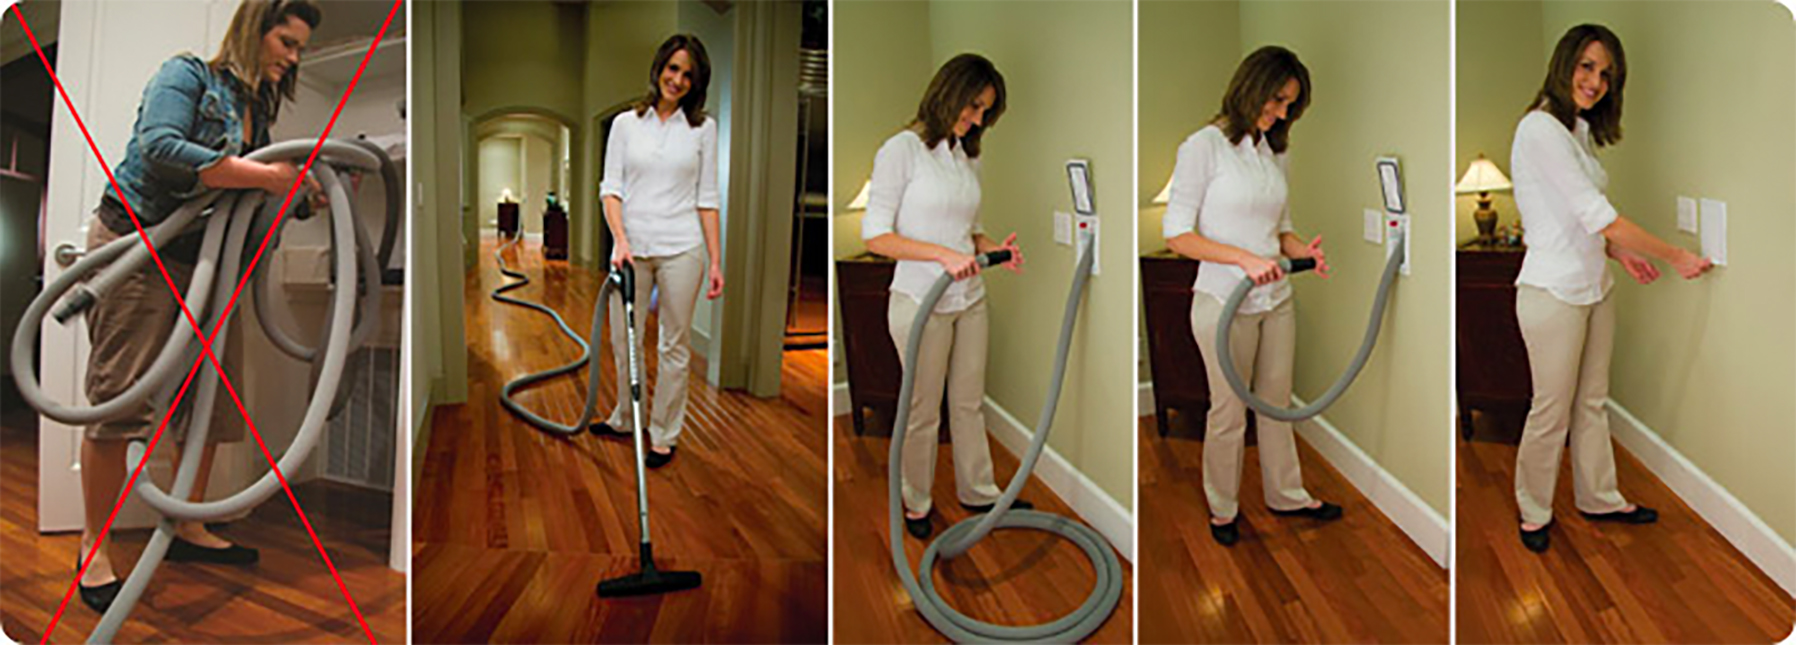 About Hide-A-Hose |  Shane's Built-In Vacuums Ltd.